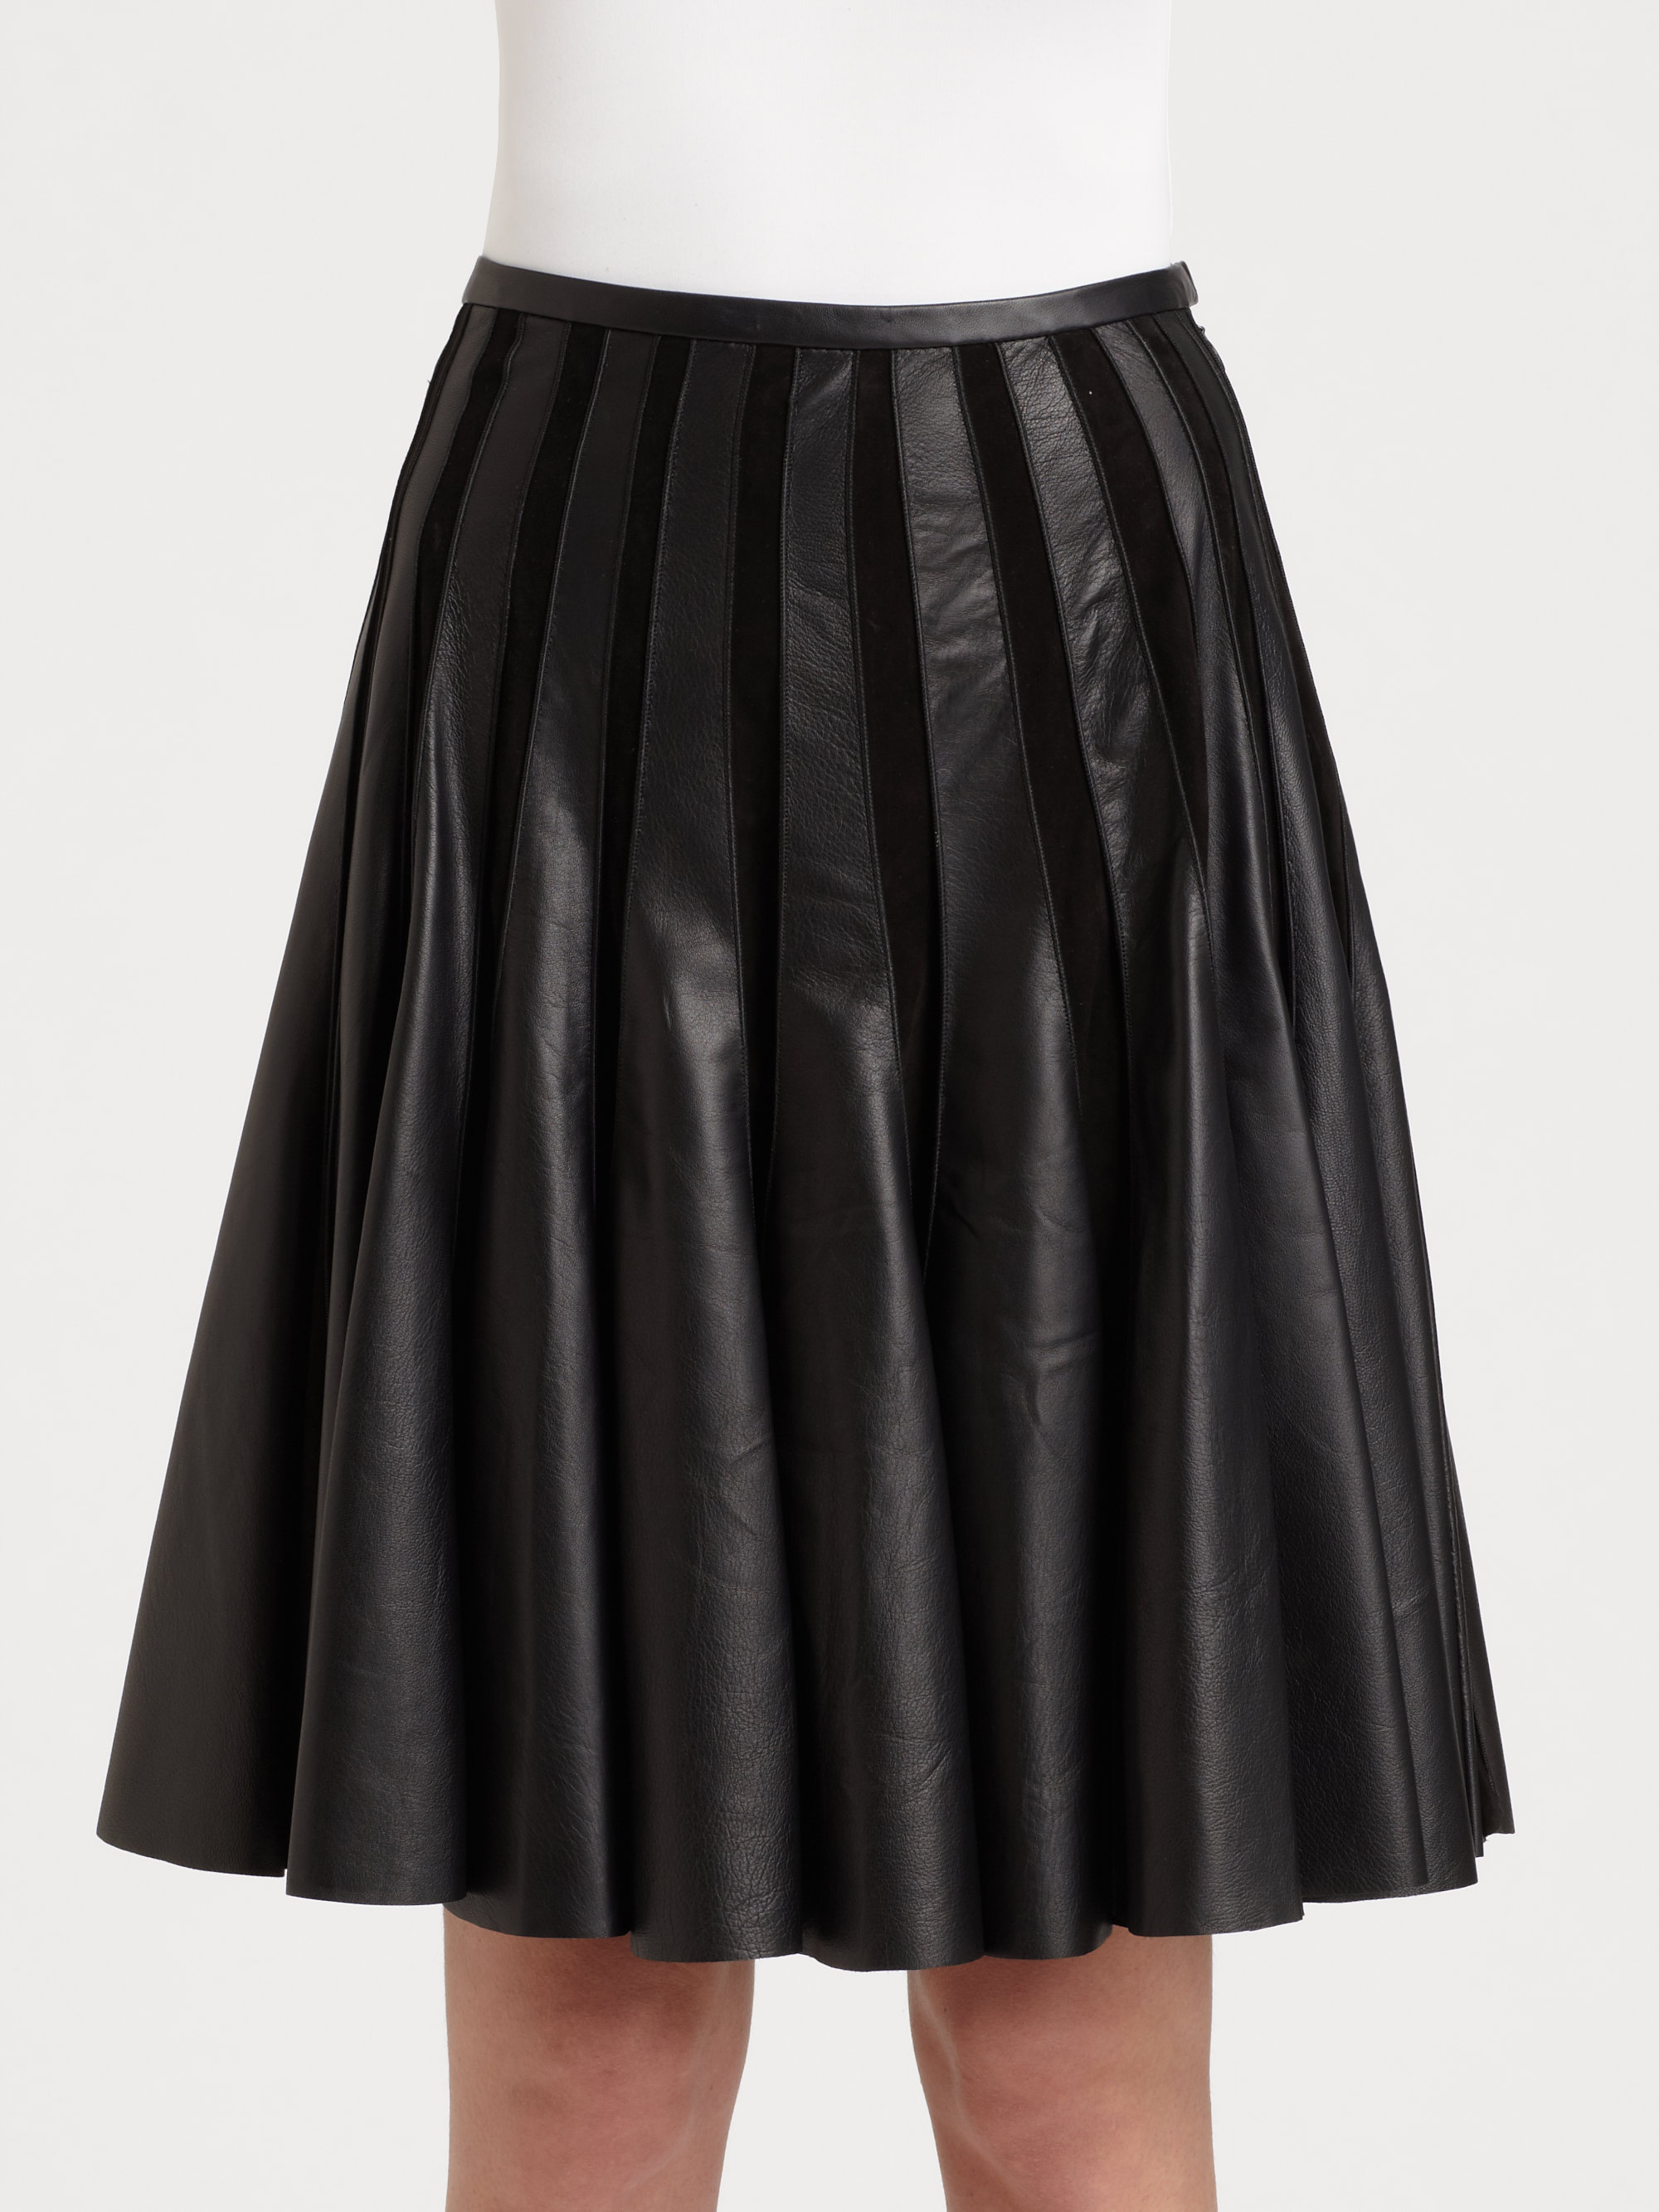 Jason Wu Leather Suede Pleated Skirt in Black | Lyst